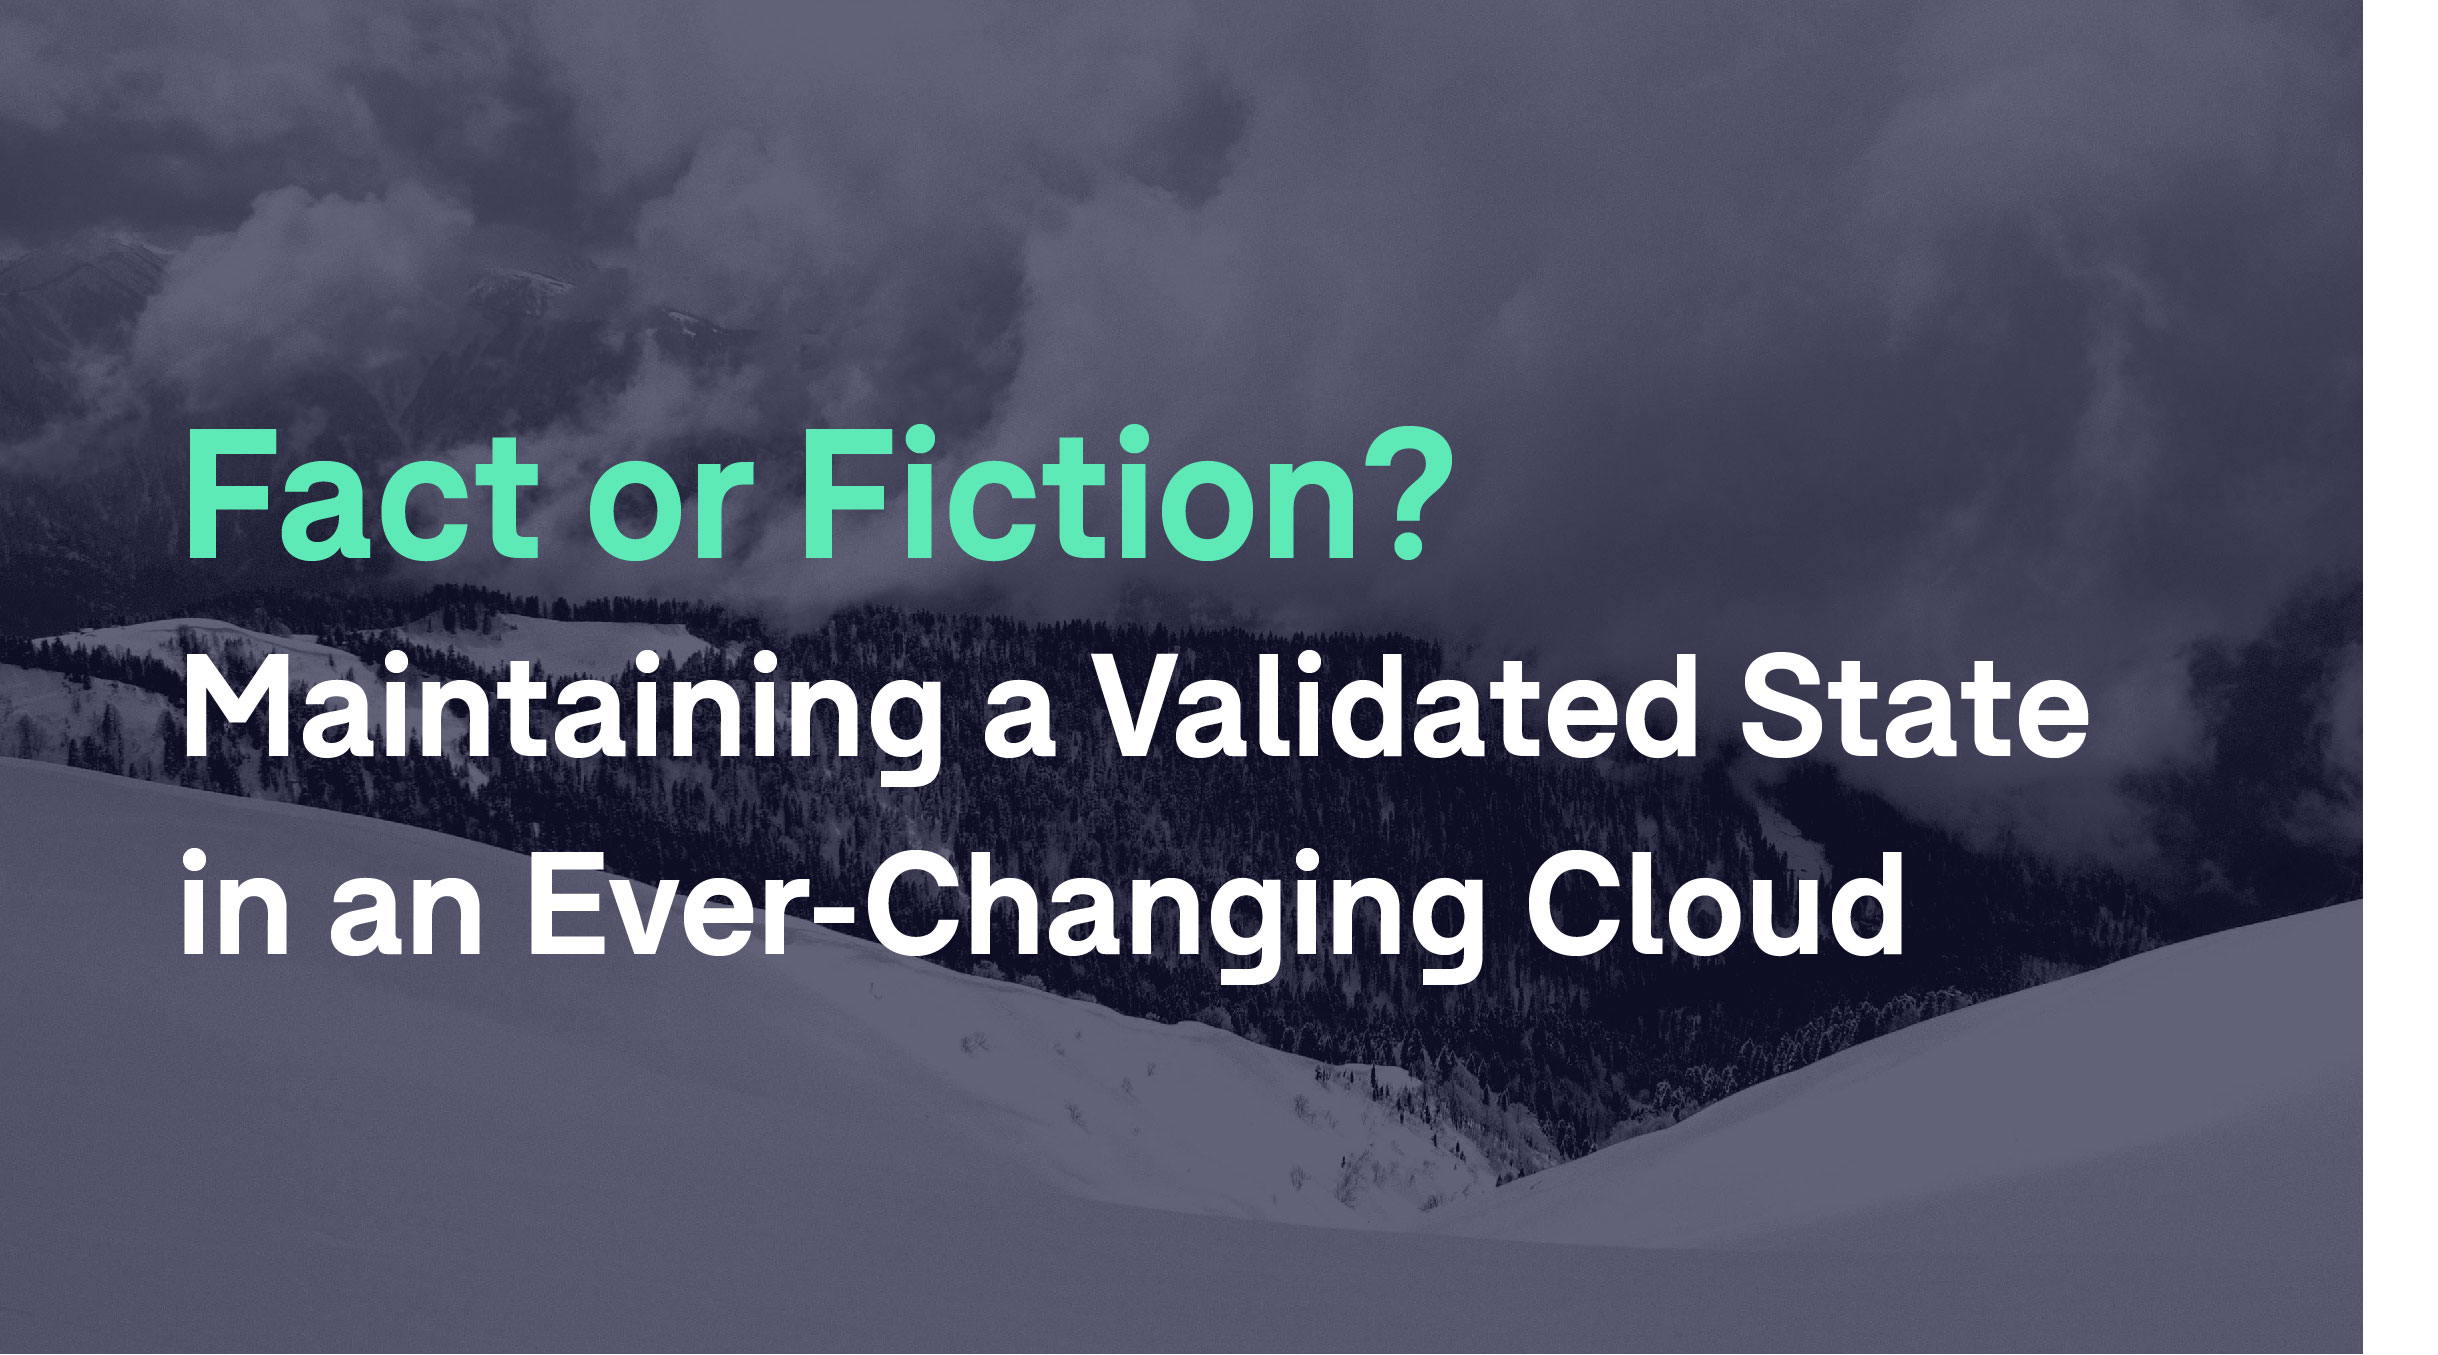 Fact or Fiction? Maintaining a Validated State in an Ever-Changing Cloud